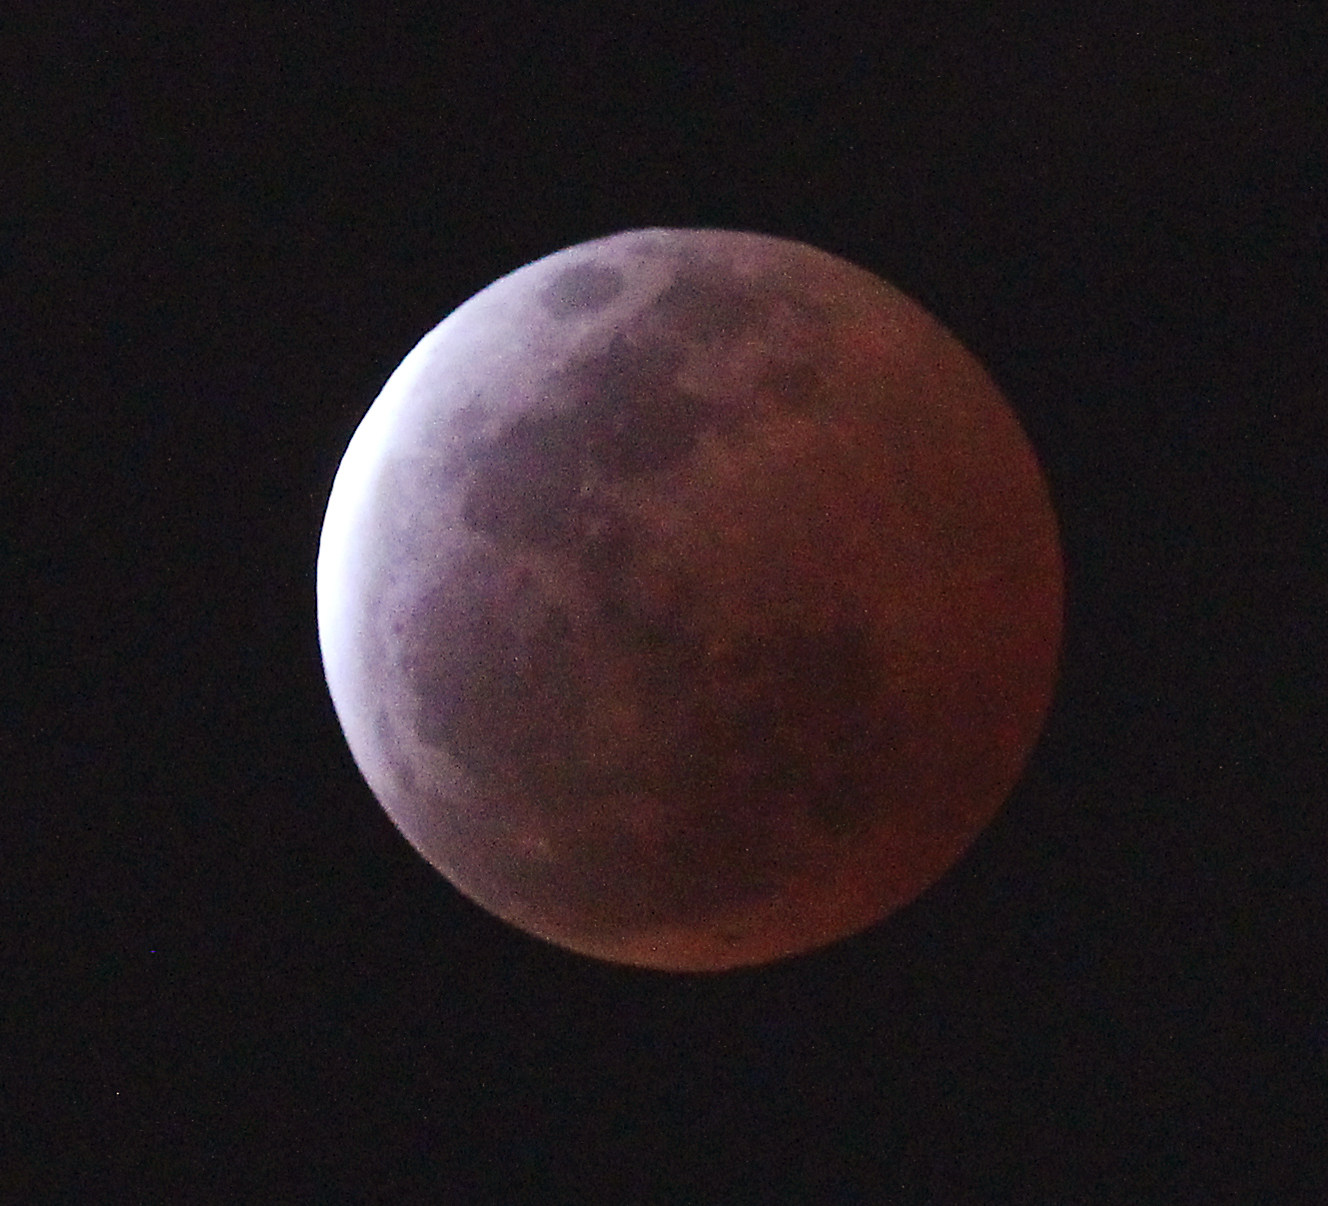 A “blood moon”, created by the full moon passing into the shadow of the earth during a total lunar eclipse, as seen from Tsim Sha Tsui. Hong Kong, on April 4, 2015. Photo: SCMP